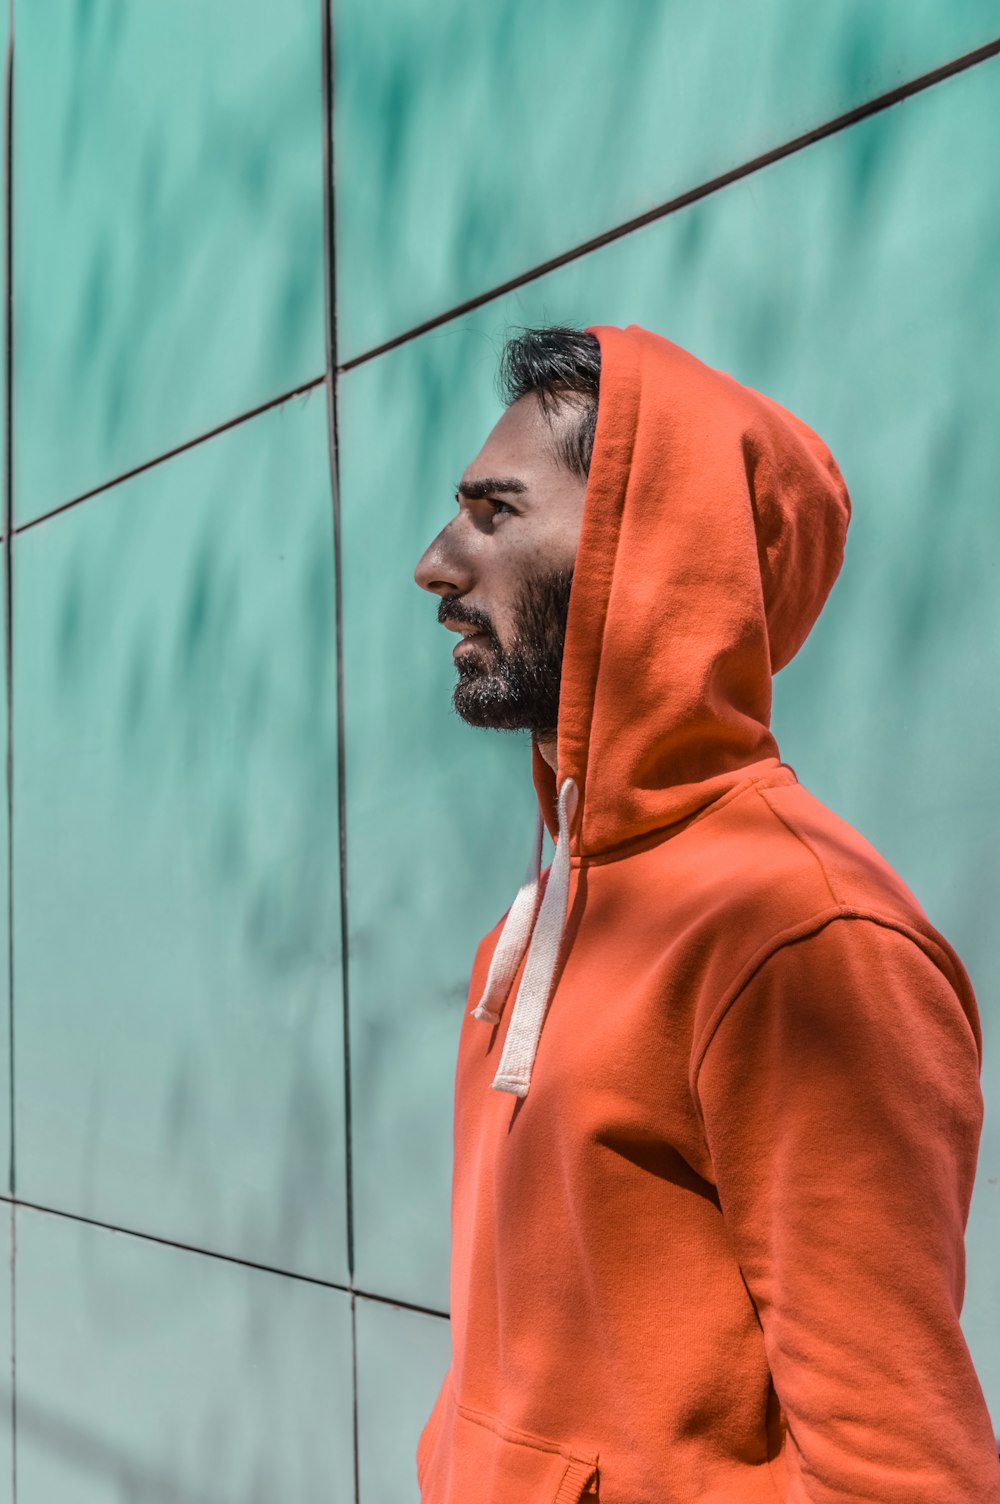 Red Hoodie Pictures  Download Free Images on Unsplash